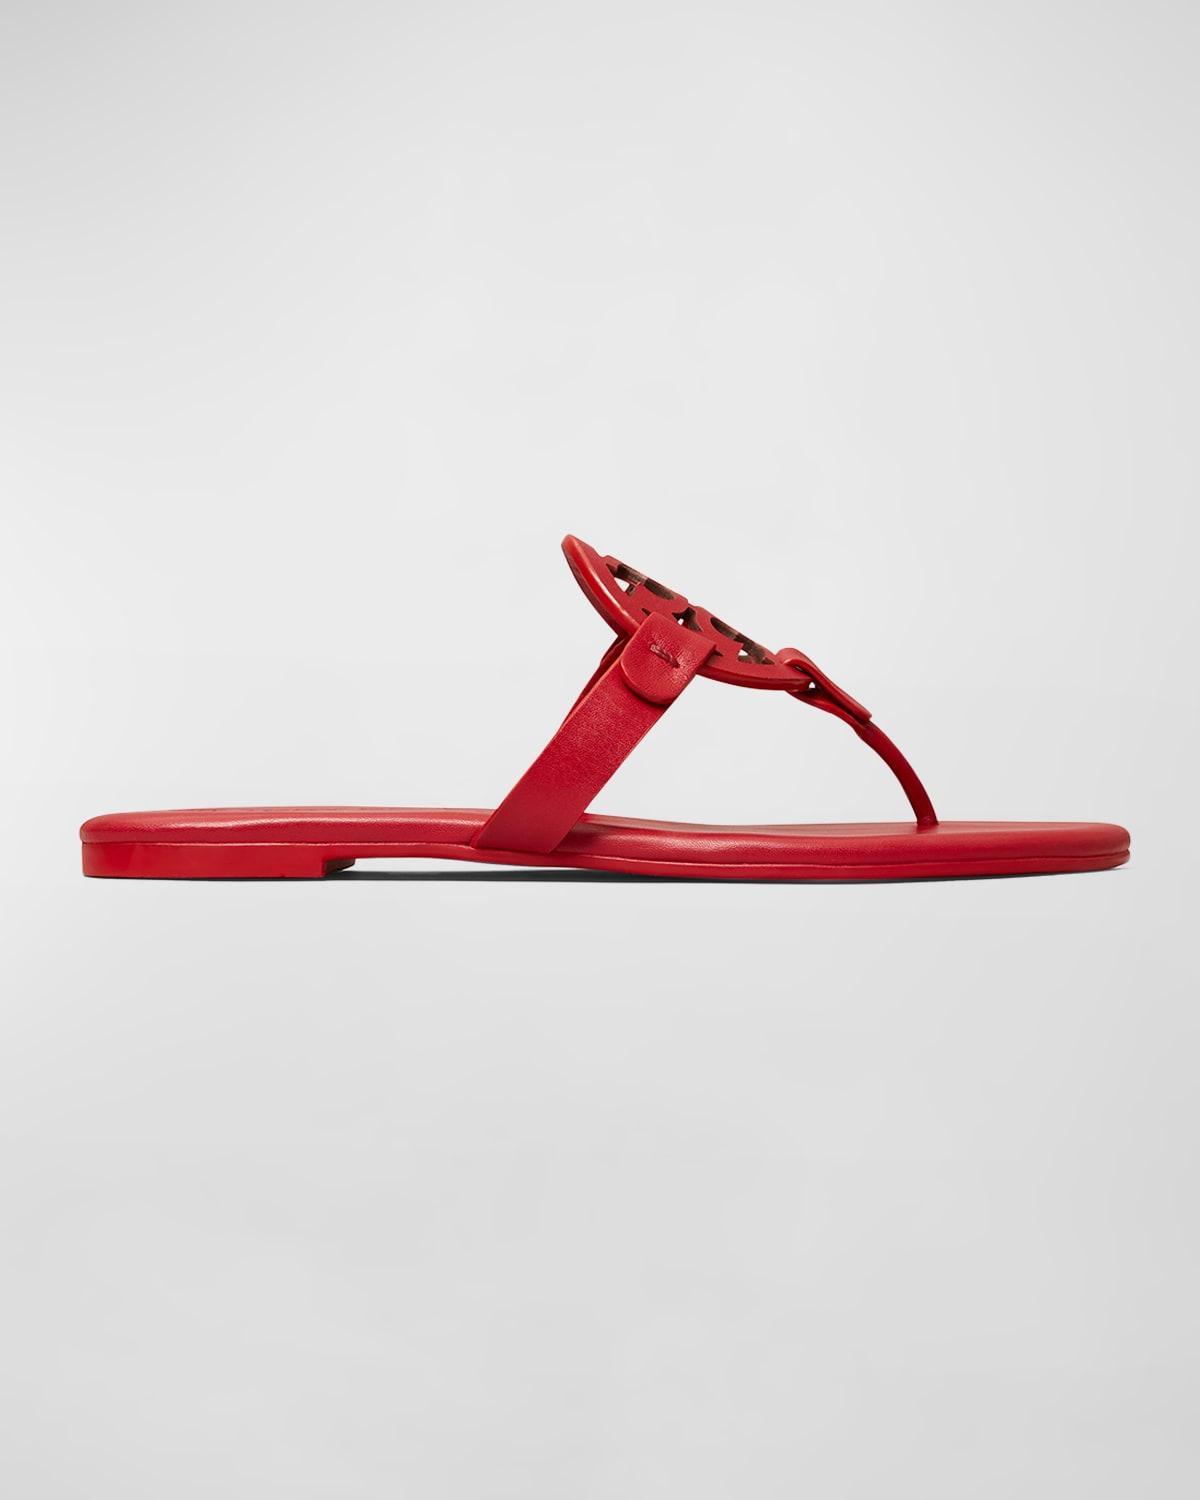 Tory Burch Miller Soft Sandal Product Image